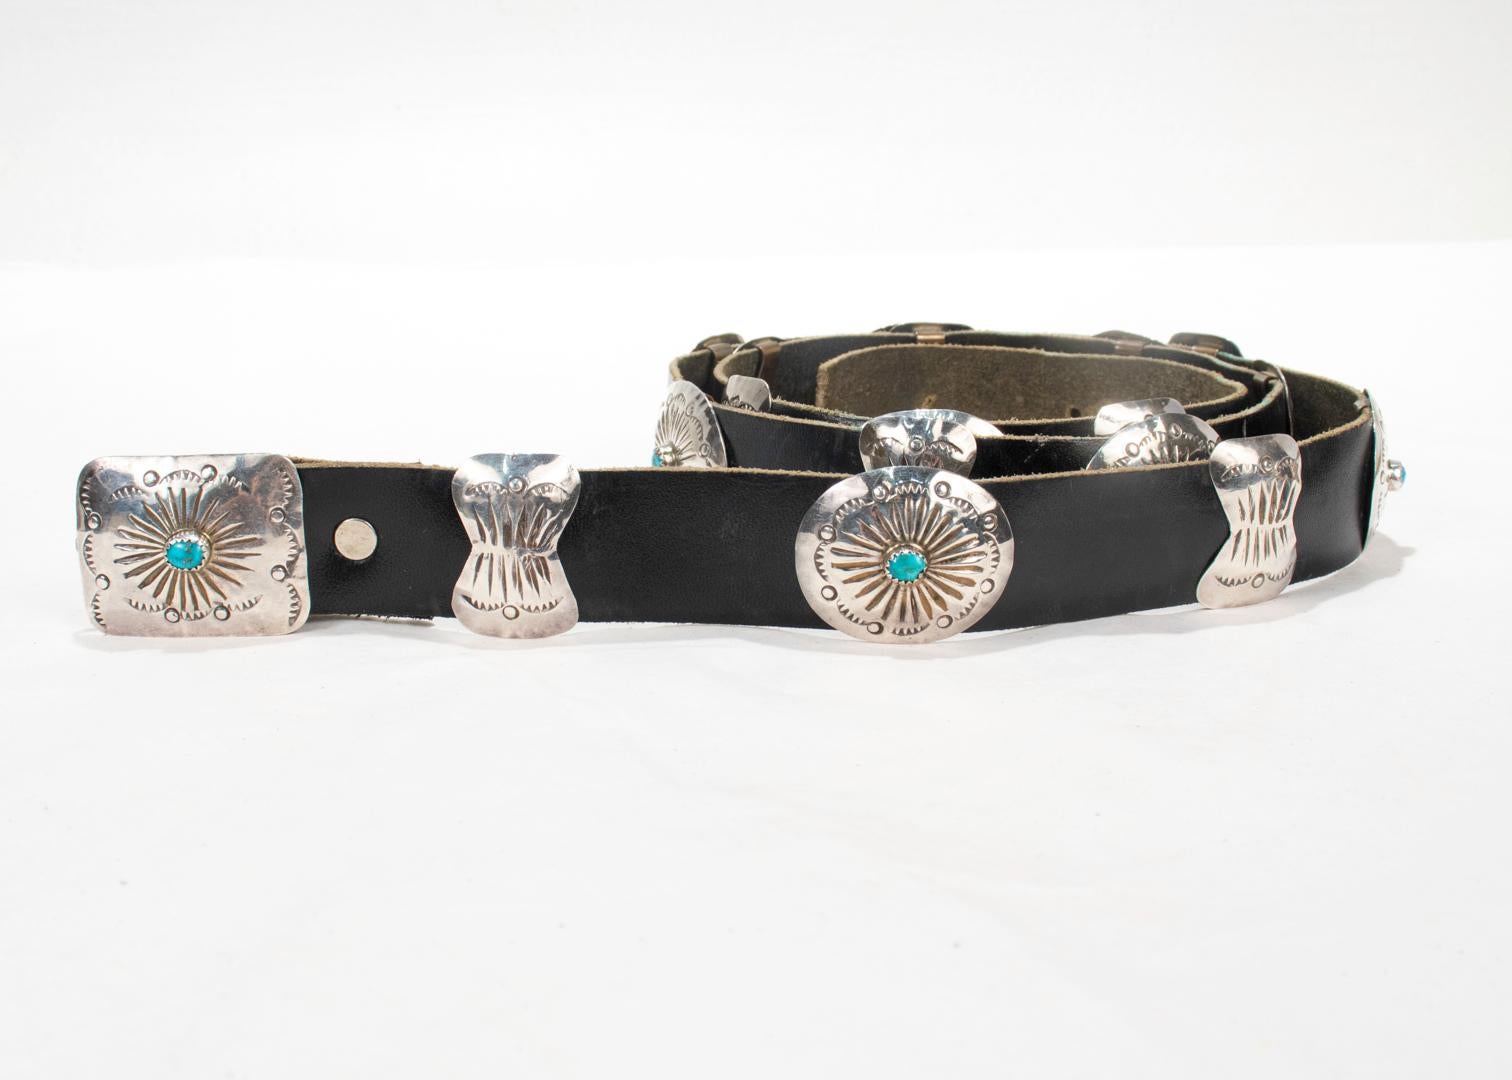 A fine vintage Navajo belt.

By Jimmy Herald.

Consisting of a leather belt with sterling silver 'conchos' (shells) and turquoise accents. The slides are copper backed and there are 18 conchos in total with 9 bowtie shaped, 8 oval shaped, and 1 as